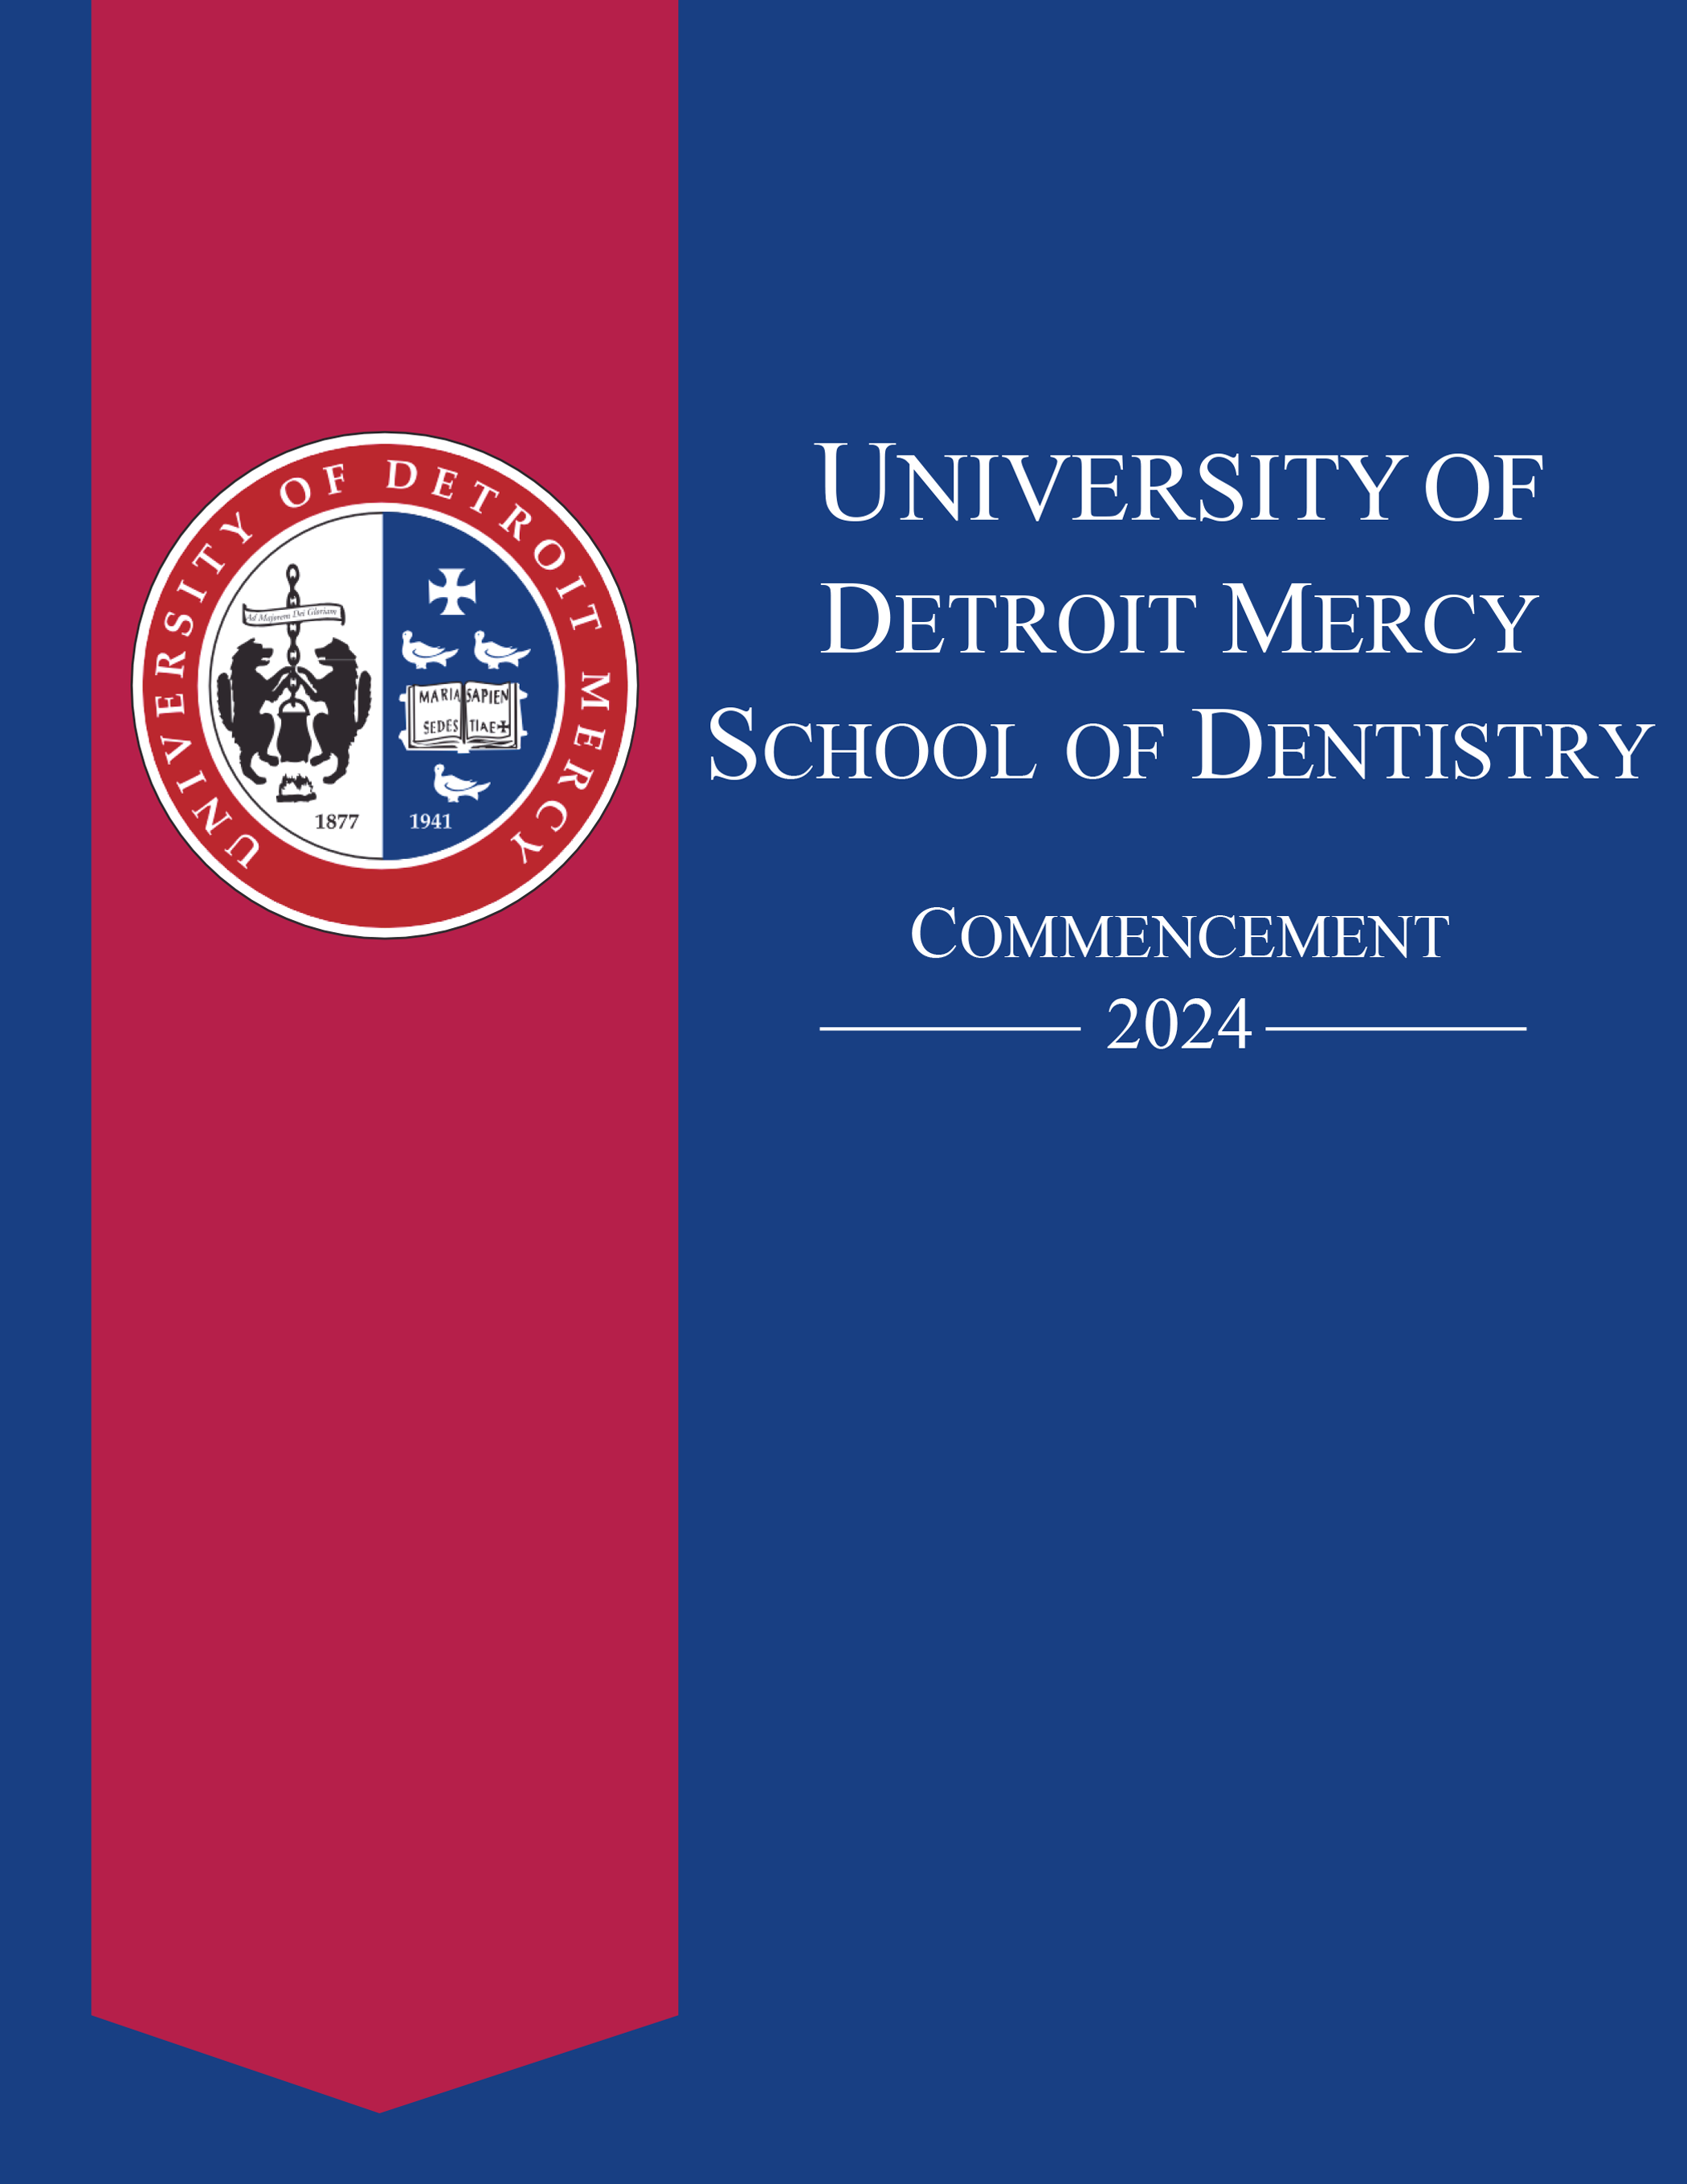 A program cover for the University of ɫۺϾþ Mercy School of Dentistry 2024 Commencement featuring the UDM crest.